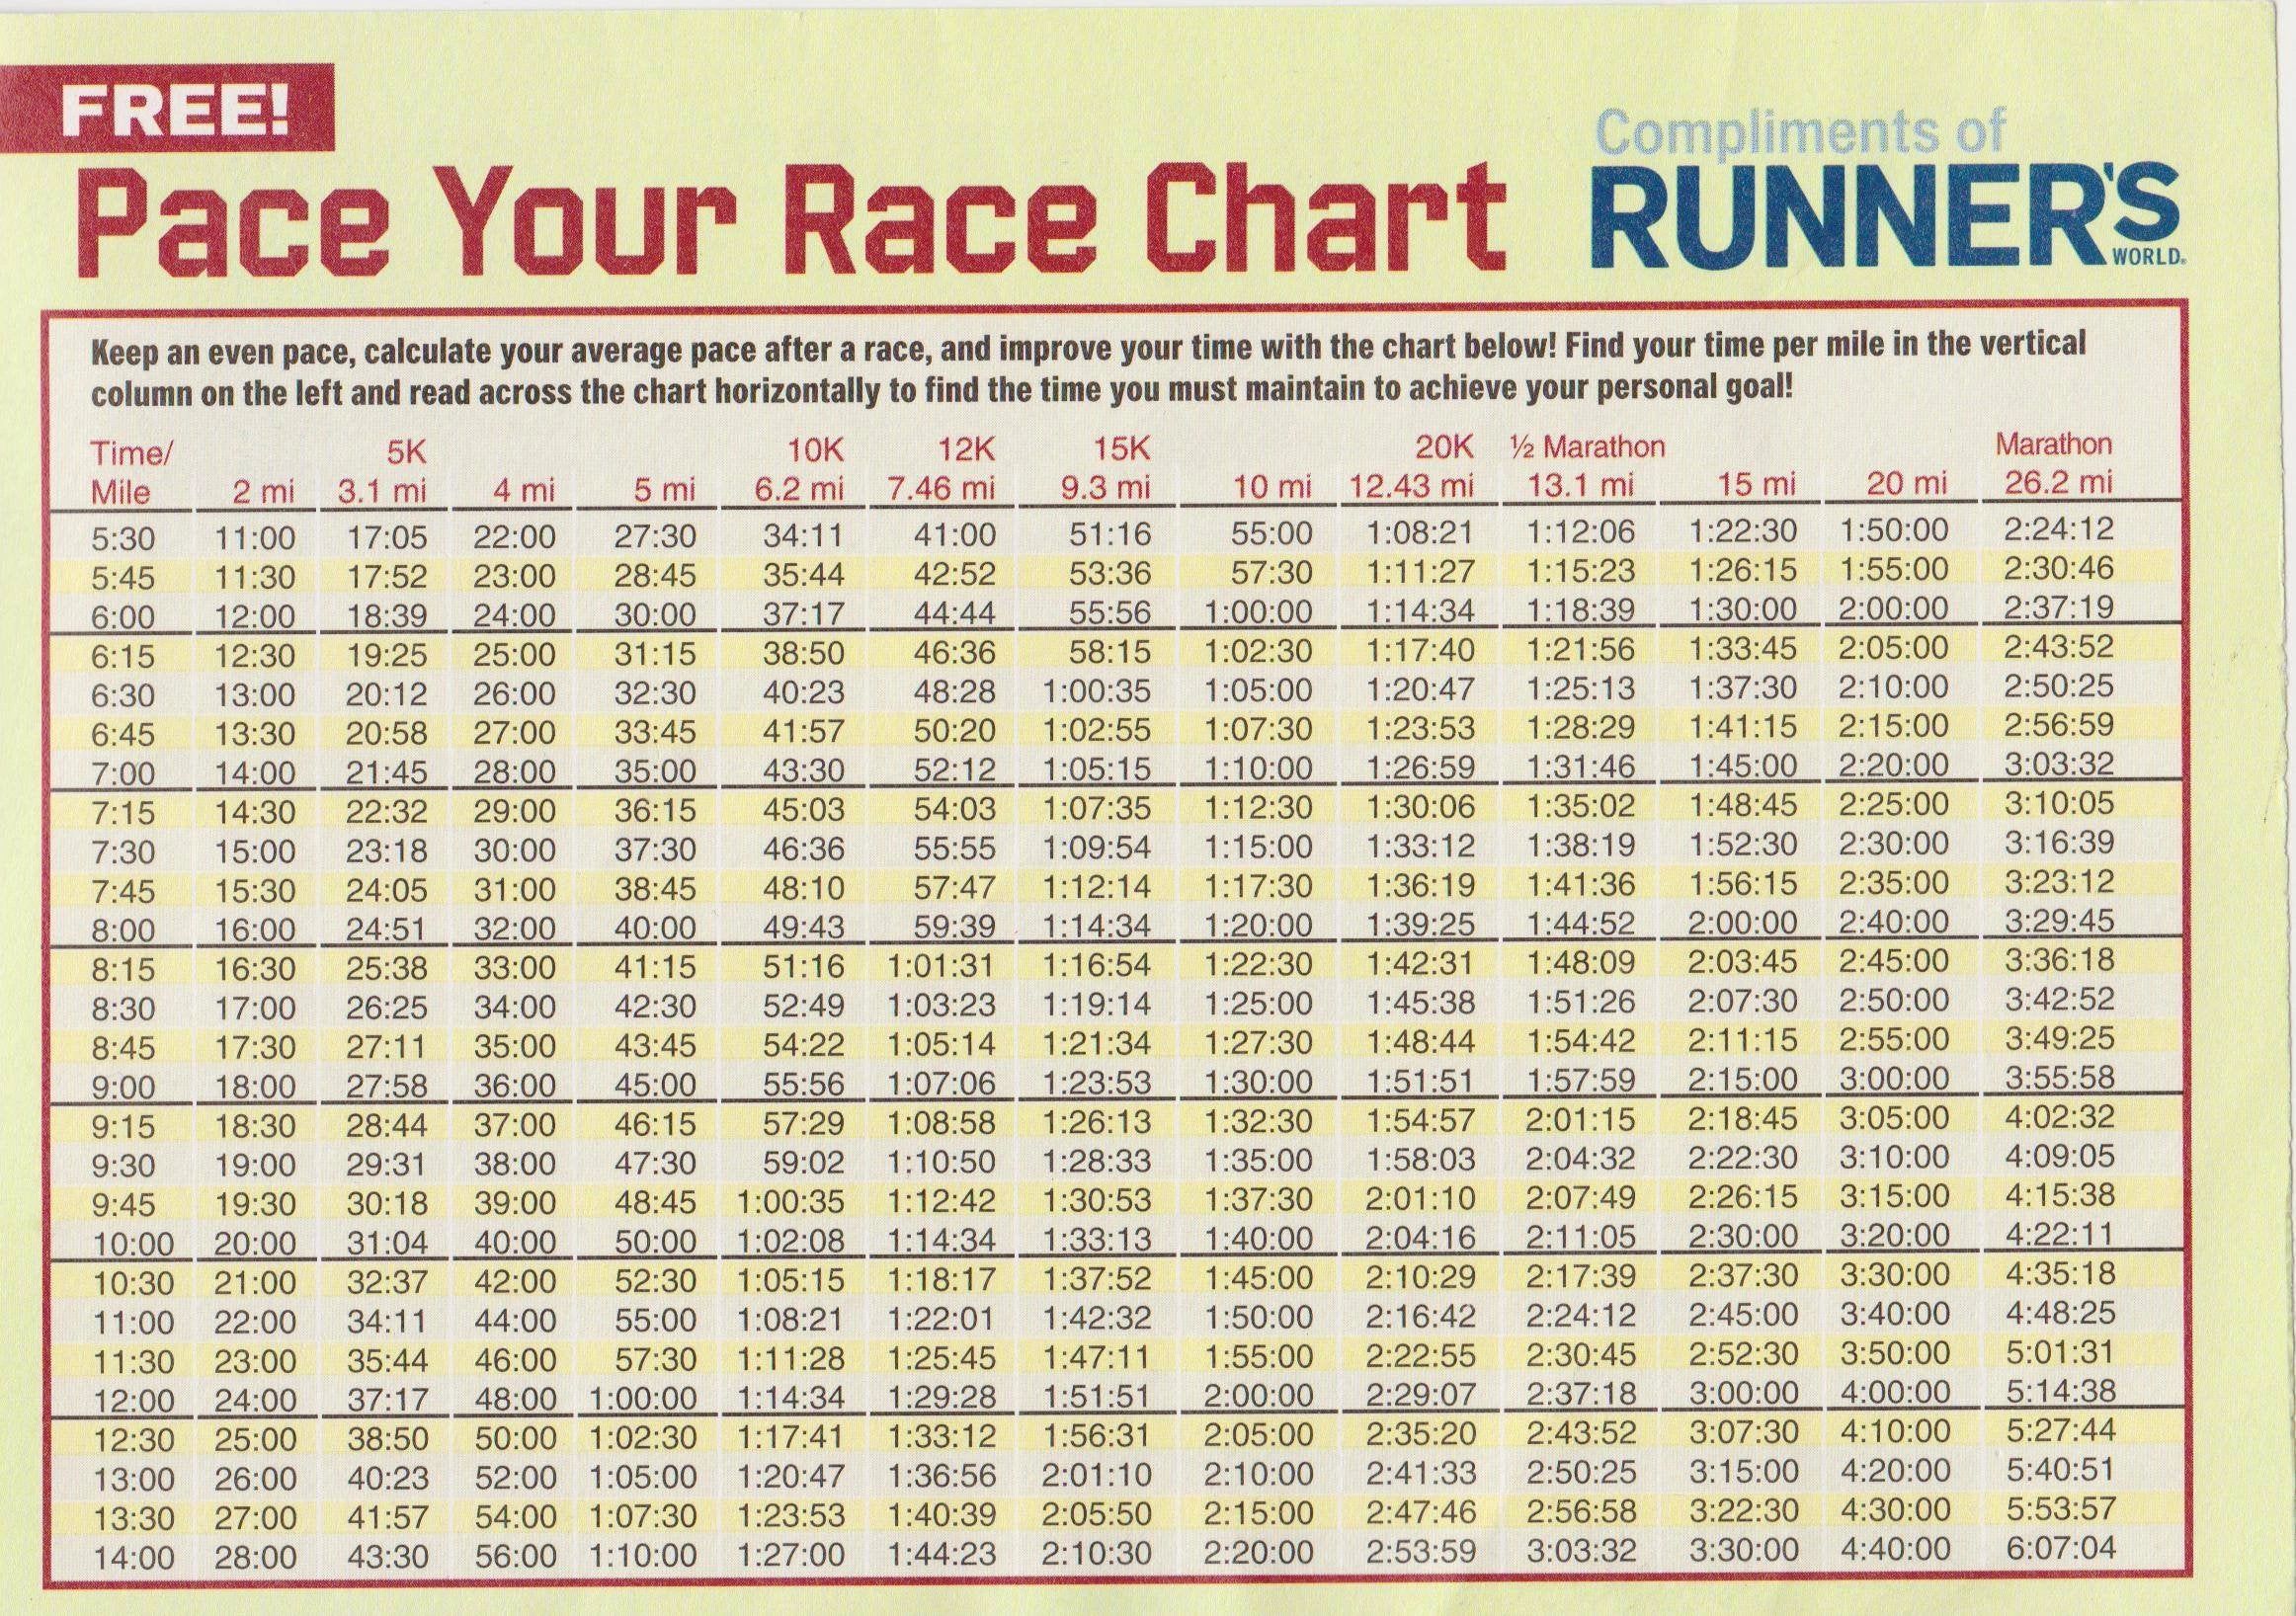 Half Marathon Pace Chart: Free Downloads for Every Pace & Finish Time